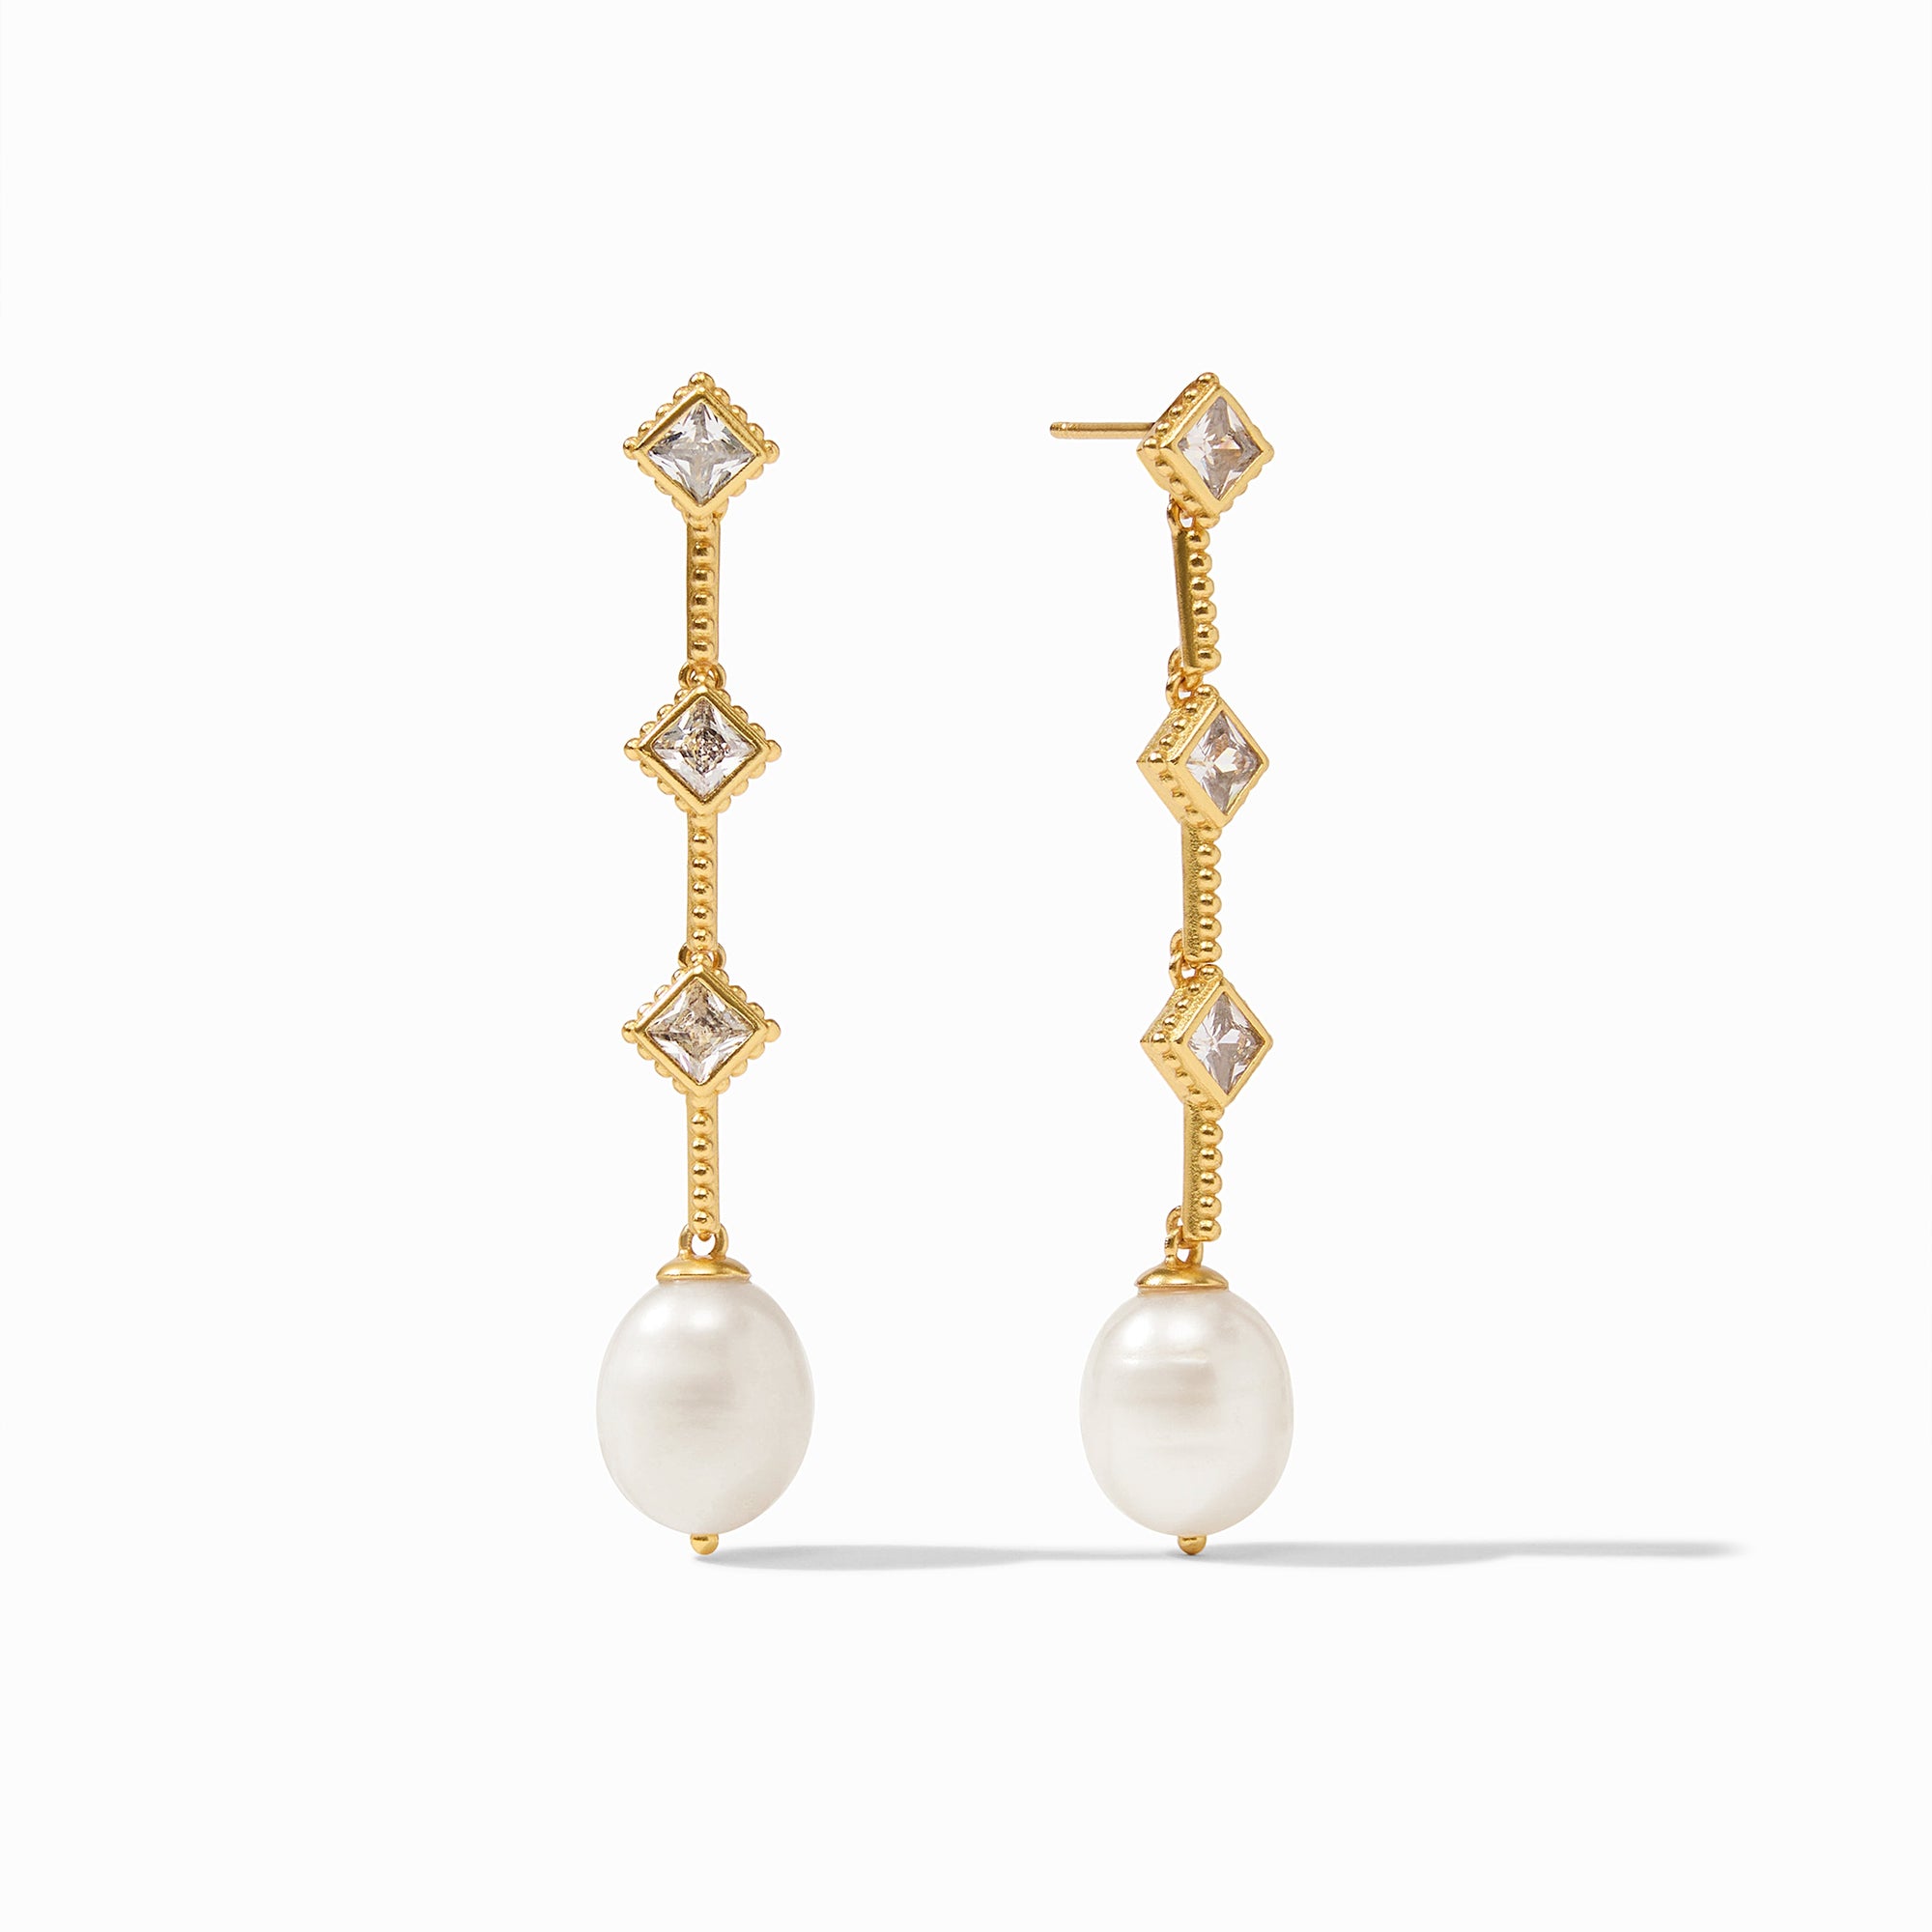 Noel Pearl Statement Earrings with CZ stations